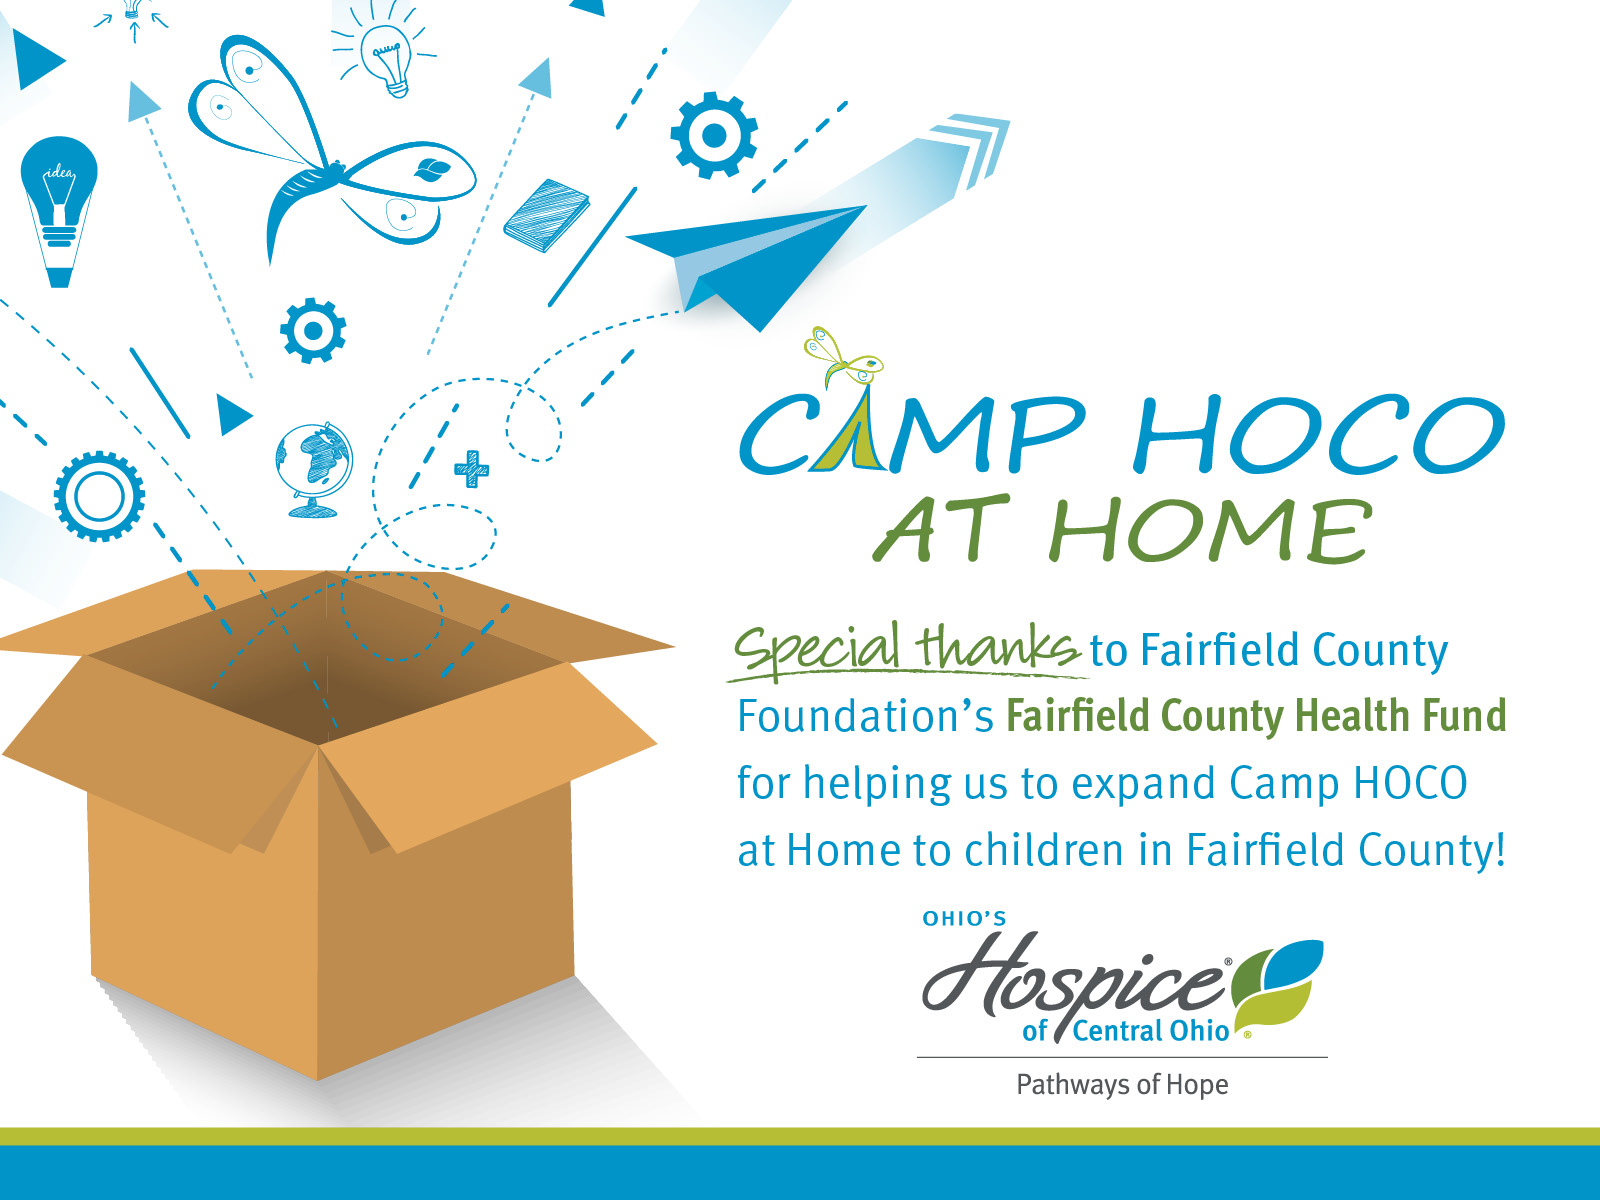 Camp HOCO at Home. Special thanks to Fairfield County Foundation's Fairfield County Health Fund for helping us to expand Camp HOCO at Home to children in Fairfield County! Ohio's Hospice of Central Ohio. Pathways of Hope.